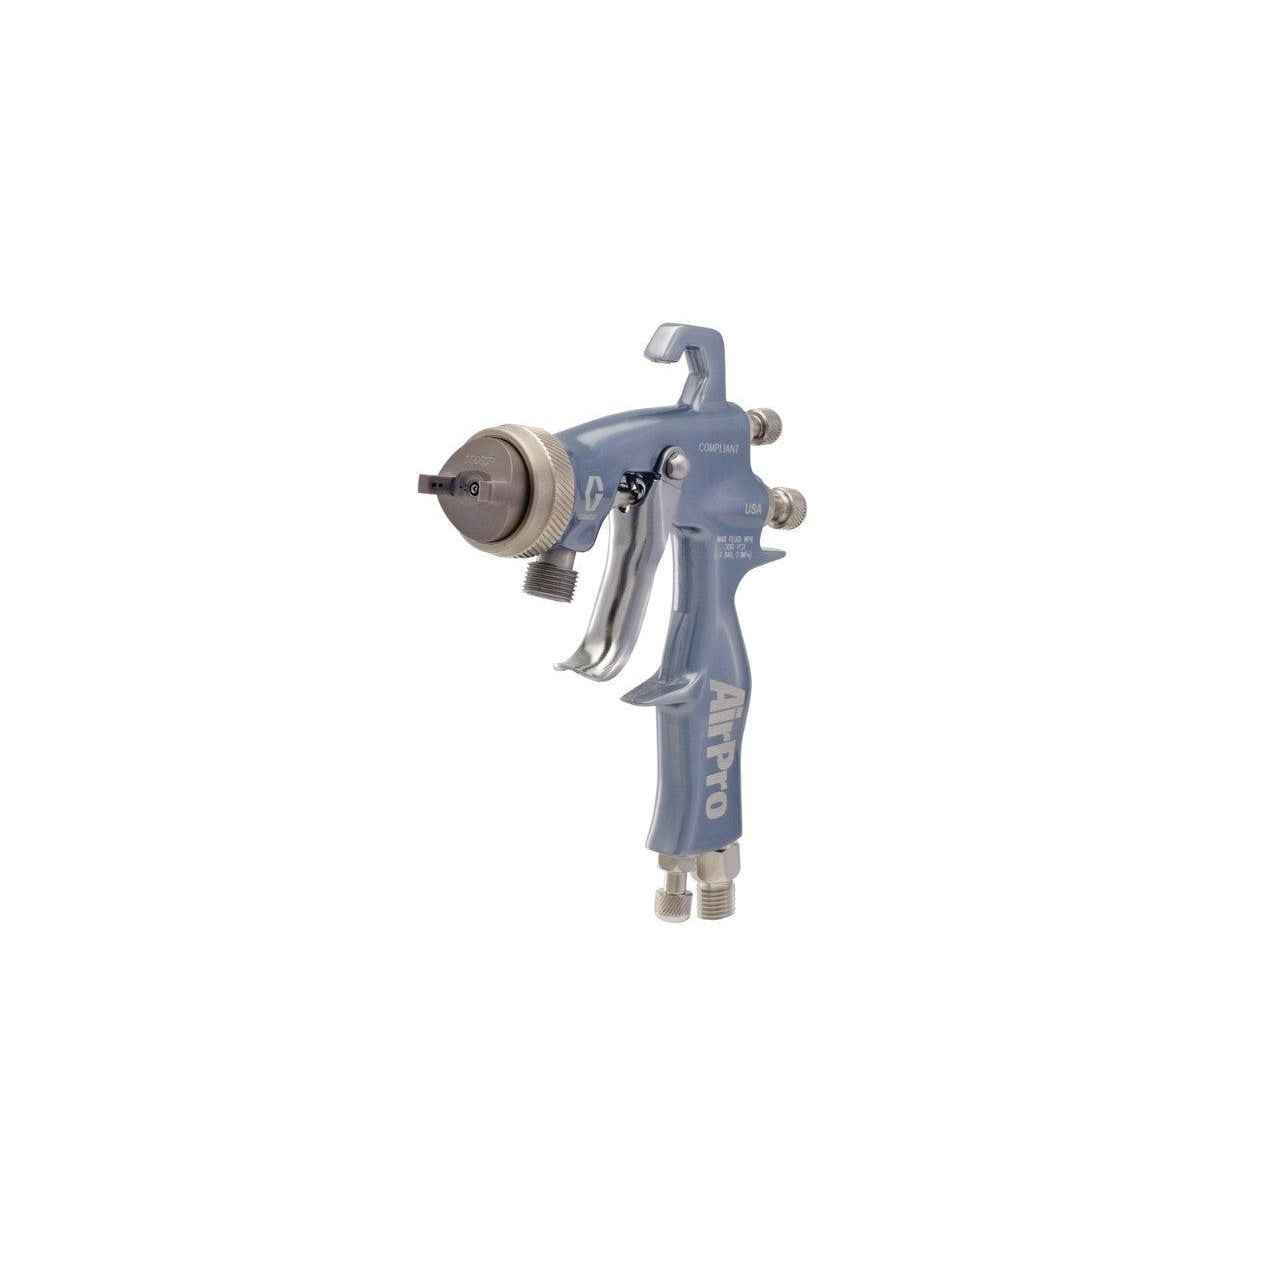 AirPro Air Spray Pressure Feed Gun, Compliant, 0.055 inch (1.4 mm) Nozzle, for General Metal Applications